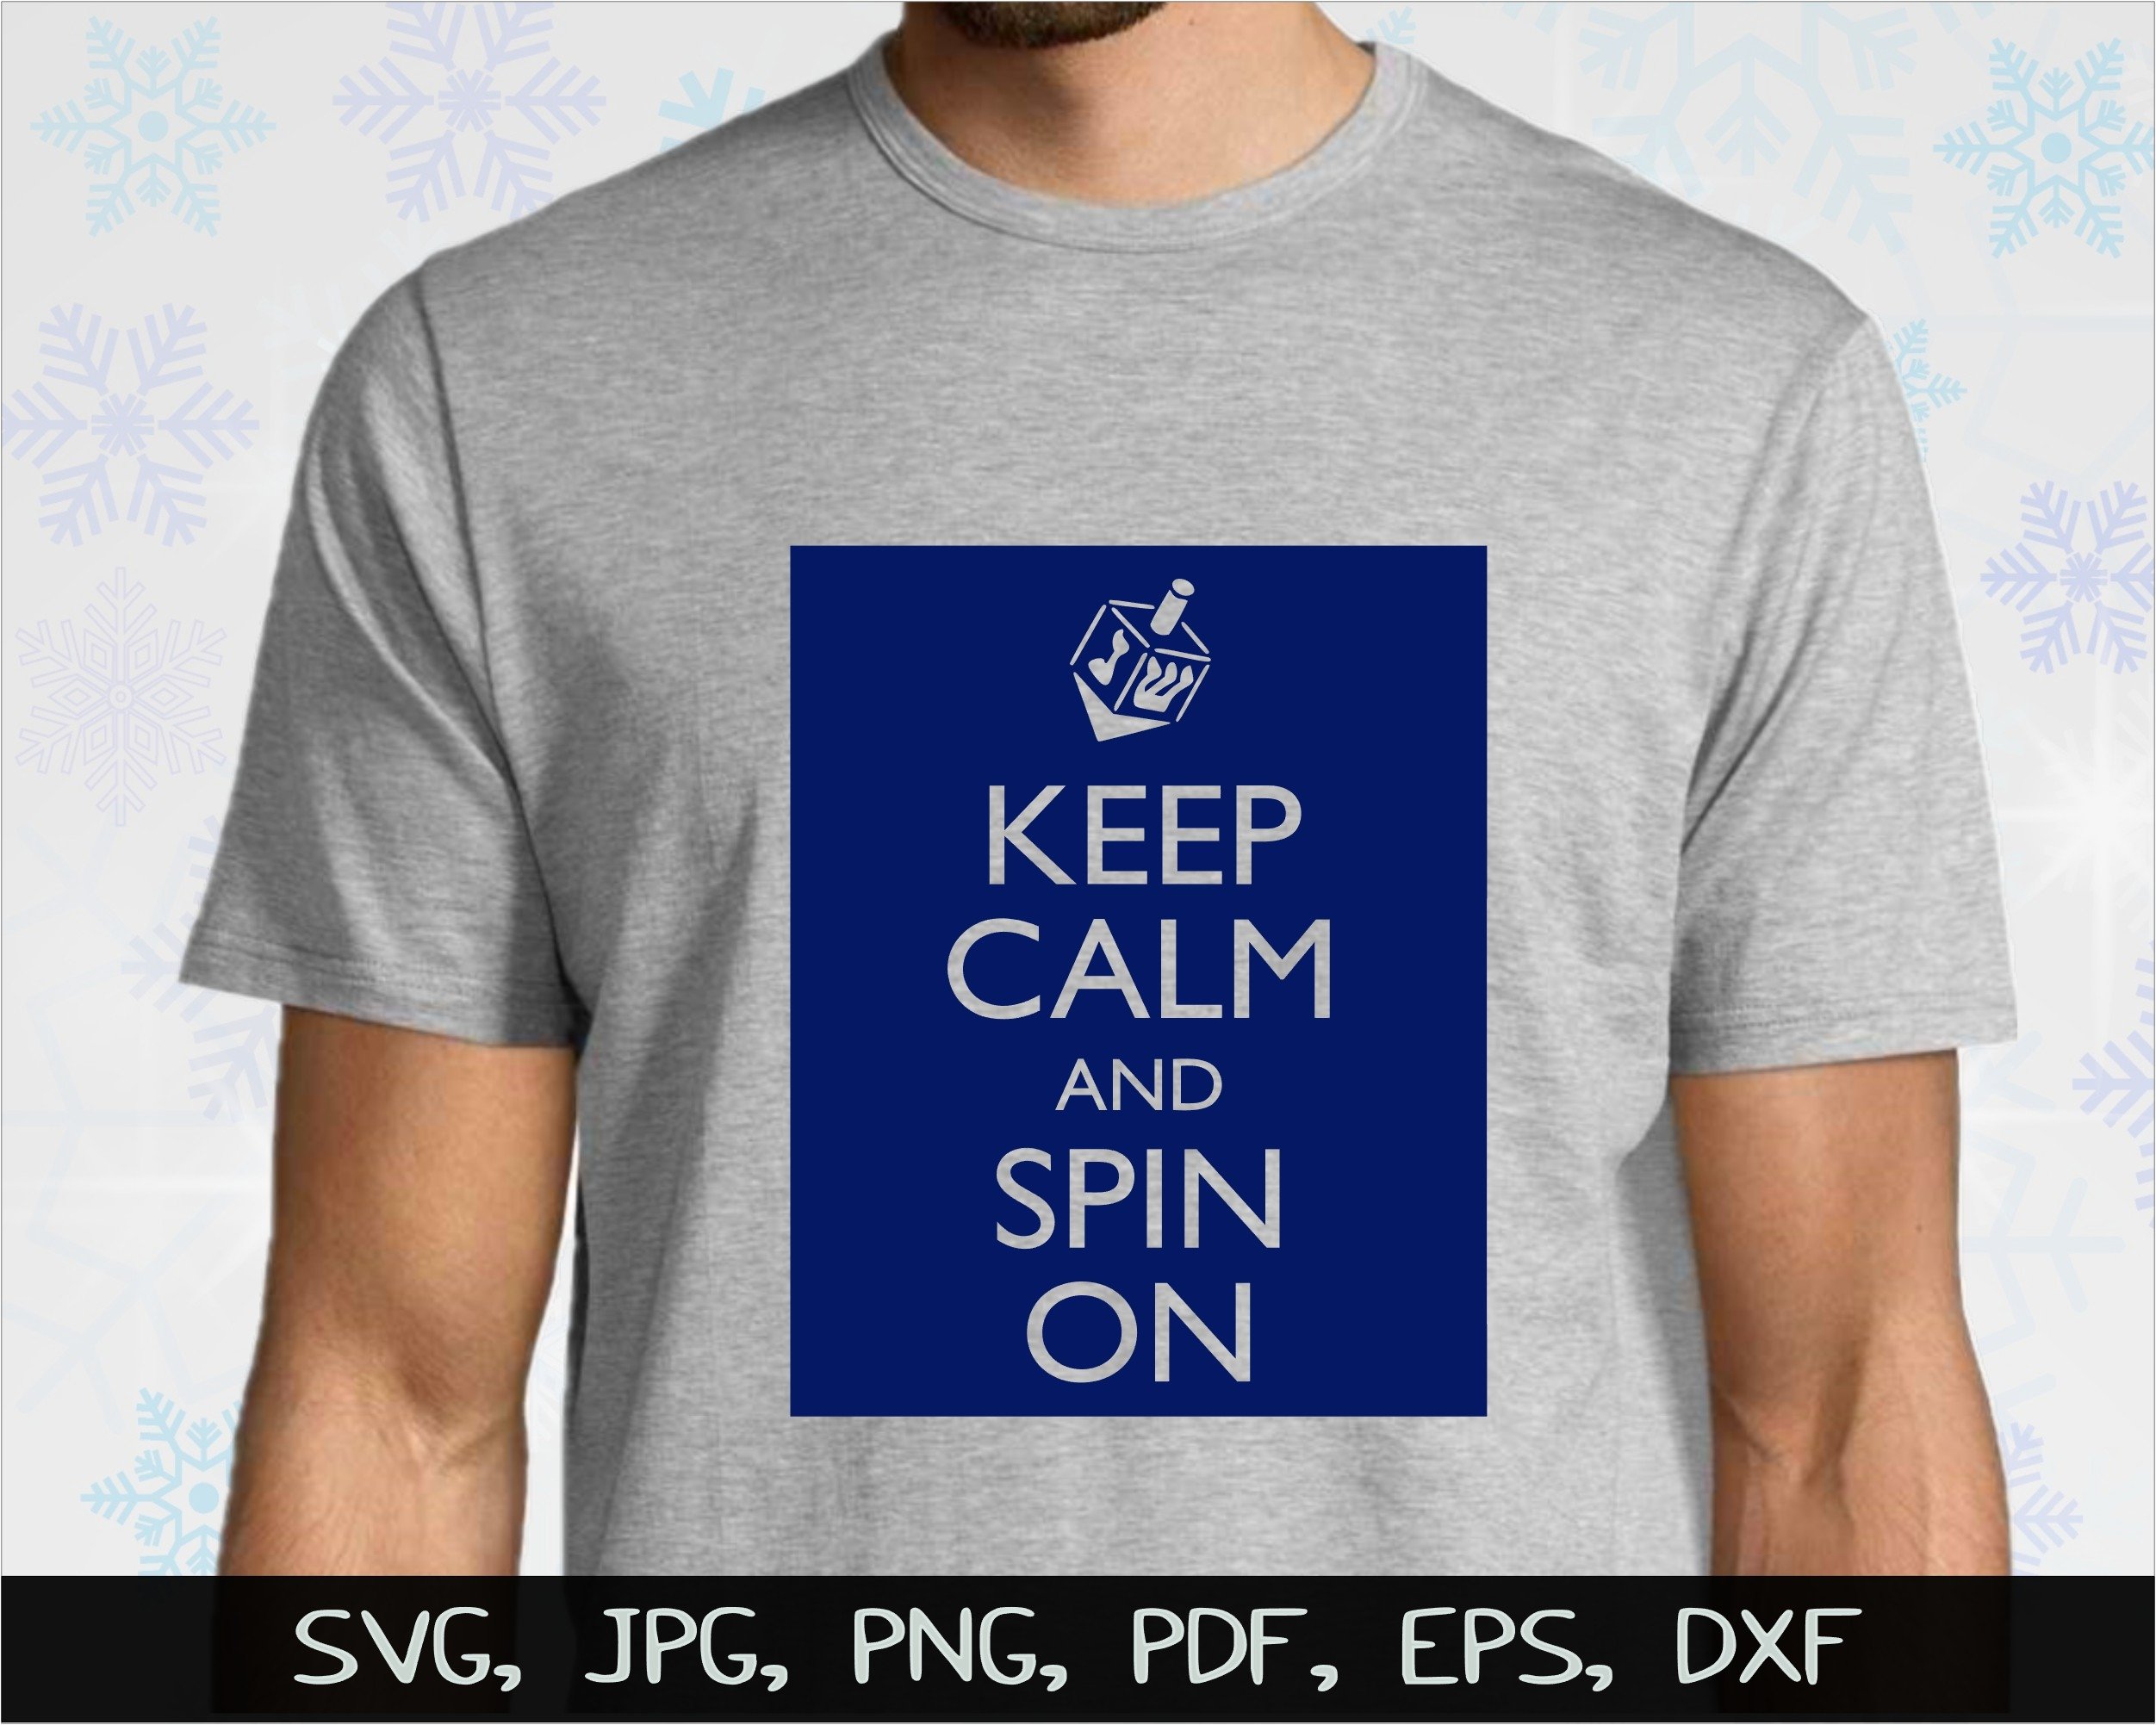 Grey T-Shirt with the lettering "Keep calm and spin on" on a blue background.